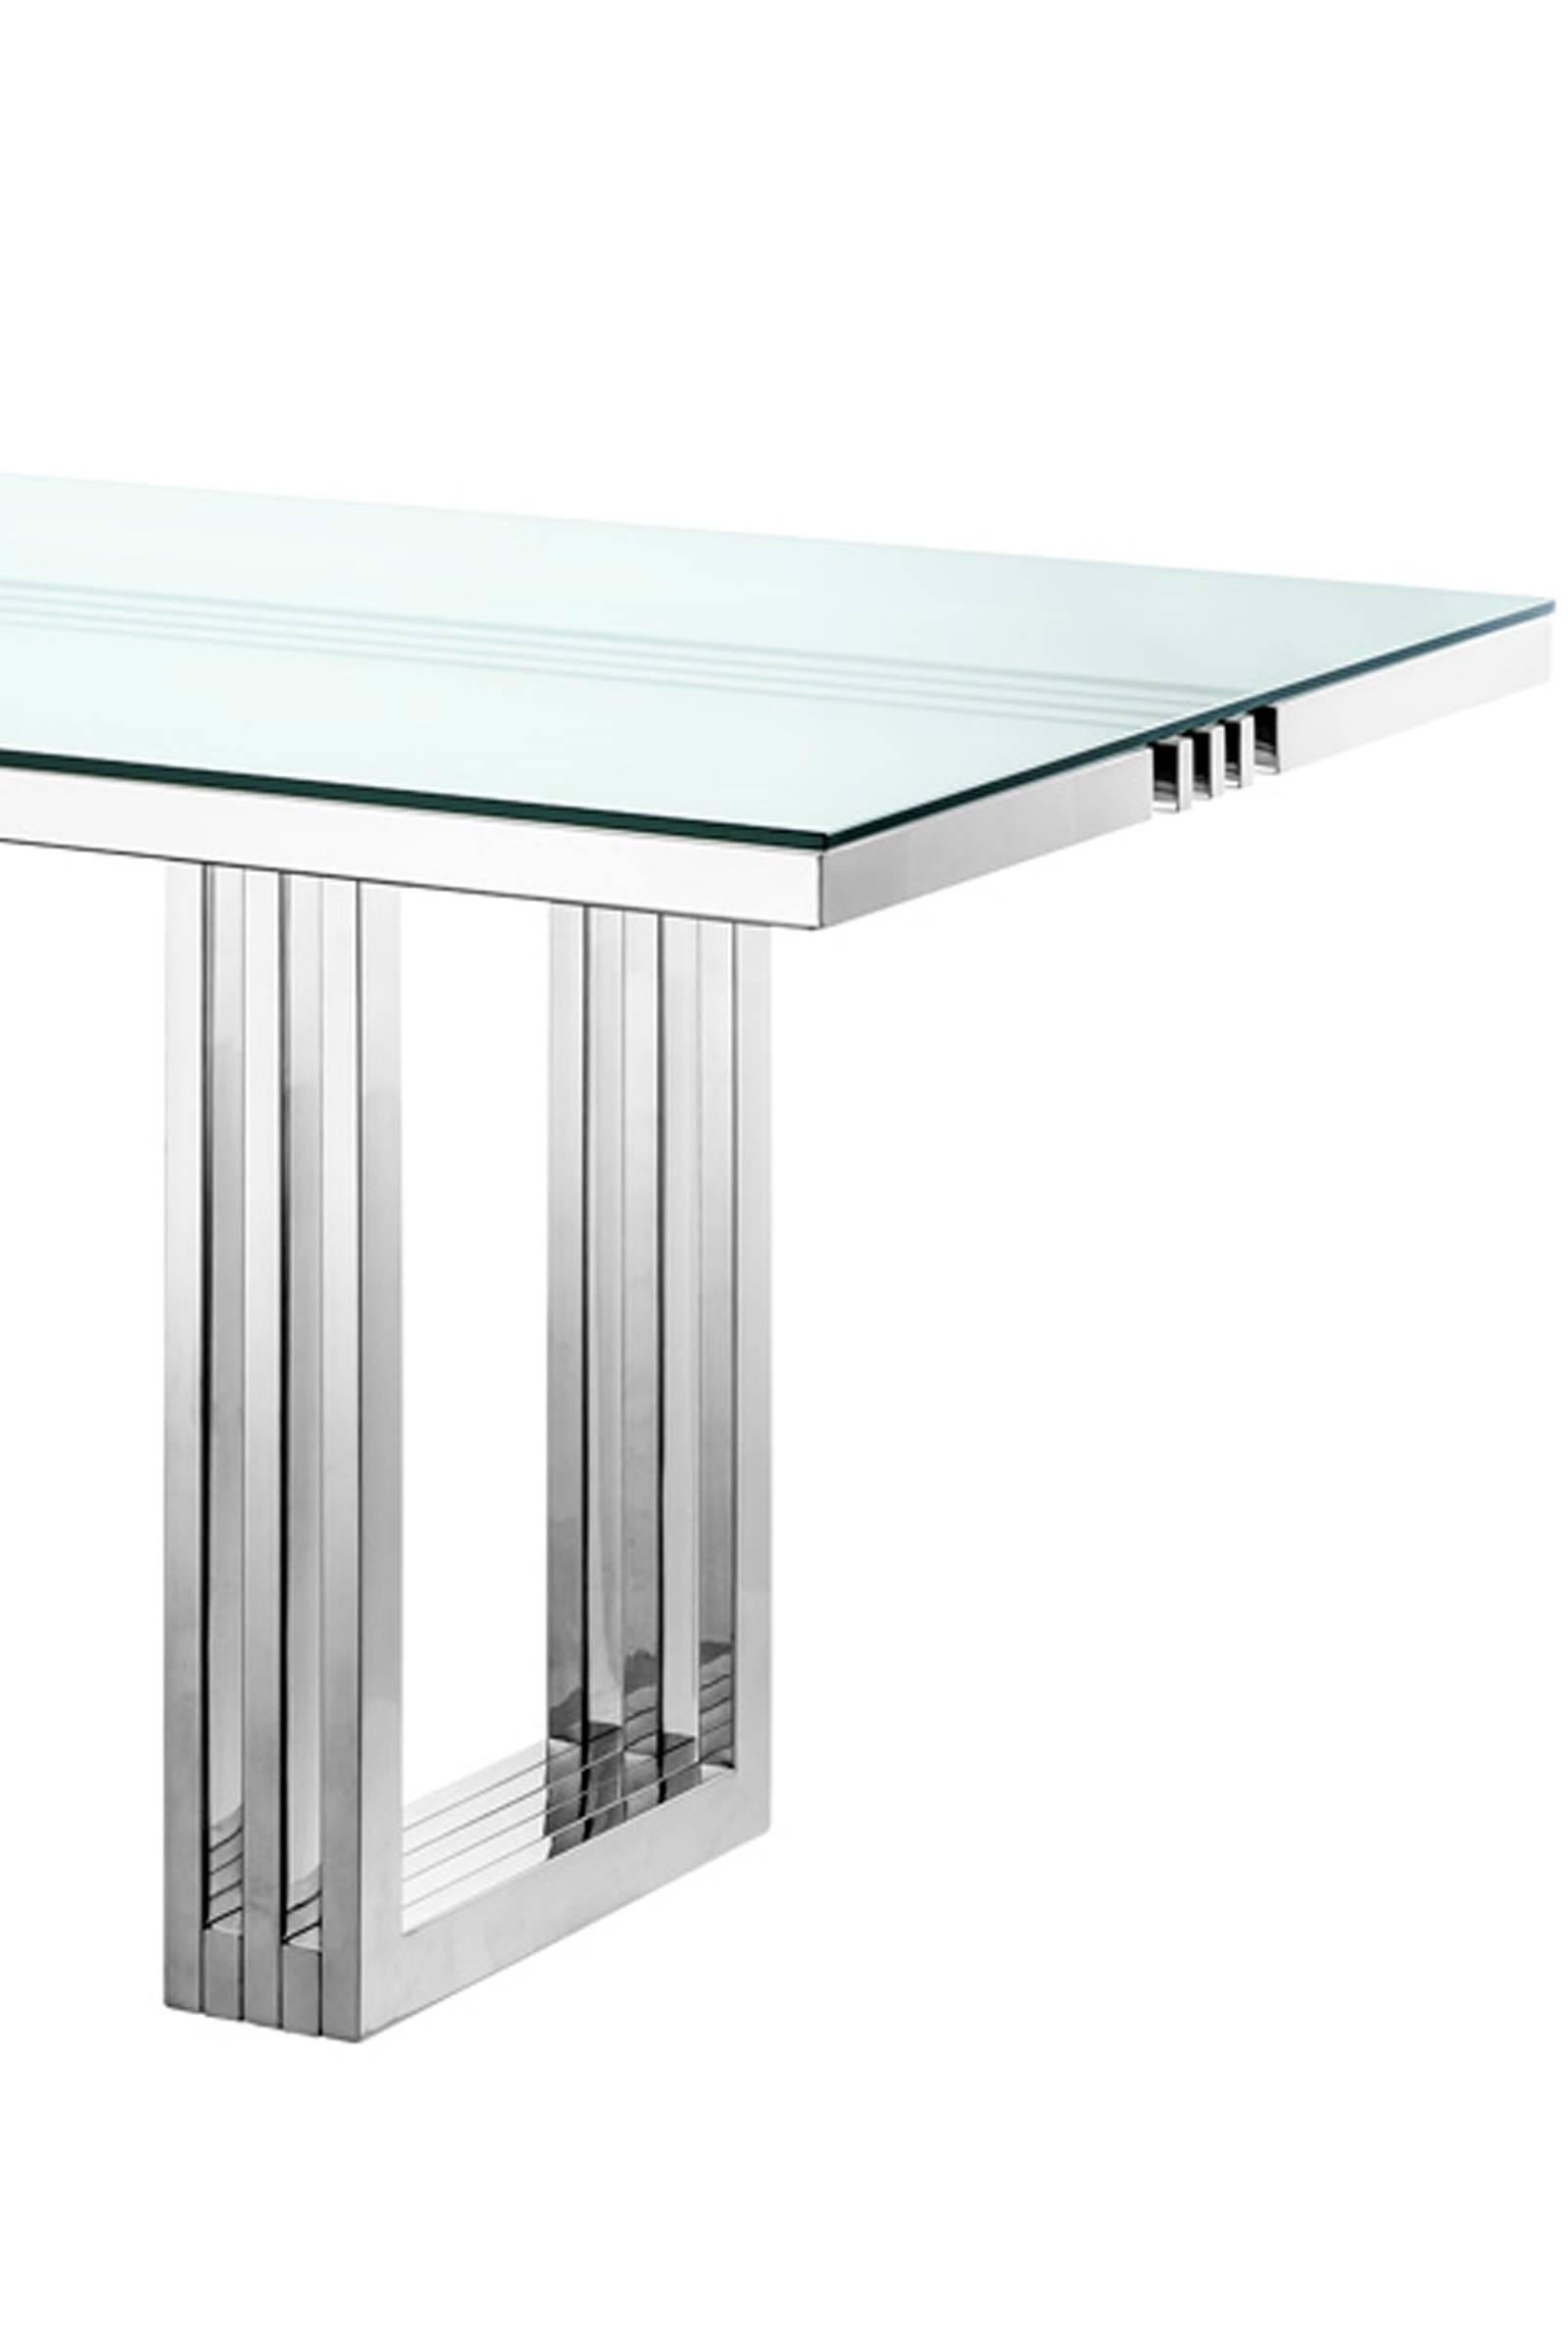 Dining table Giuseppe with polished stainless steel base,
clear glass top. 